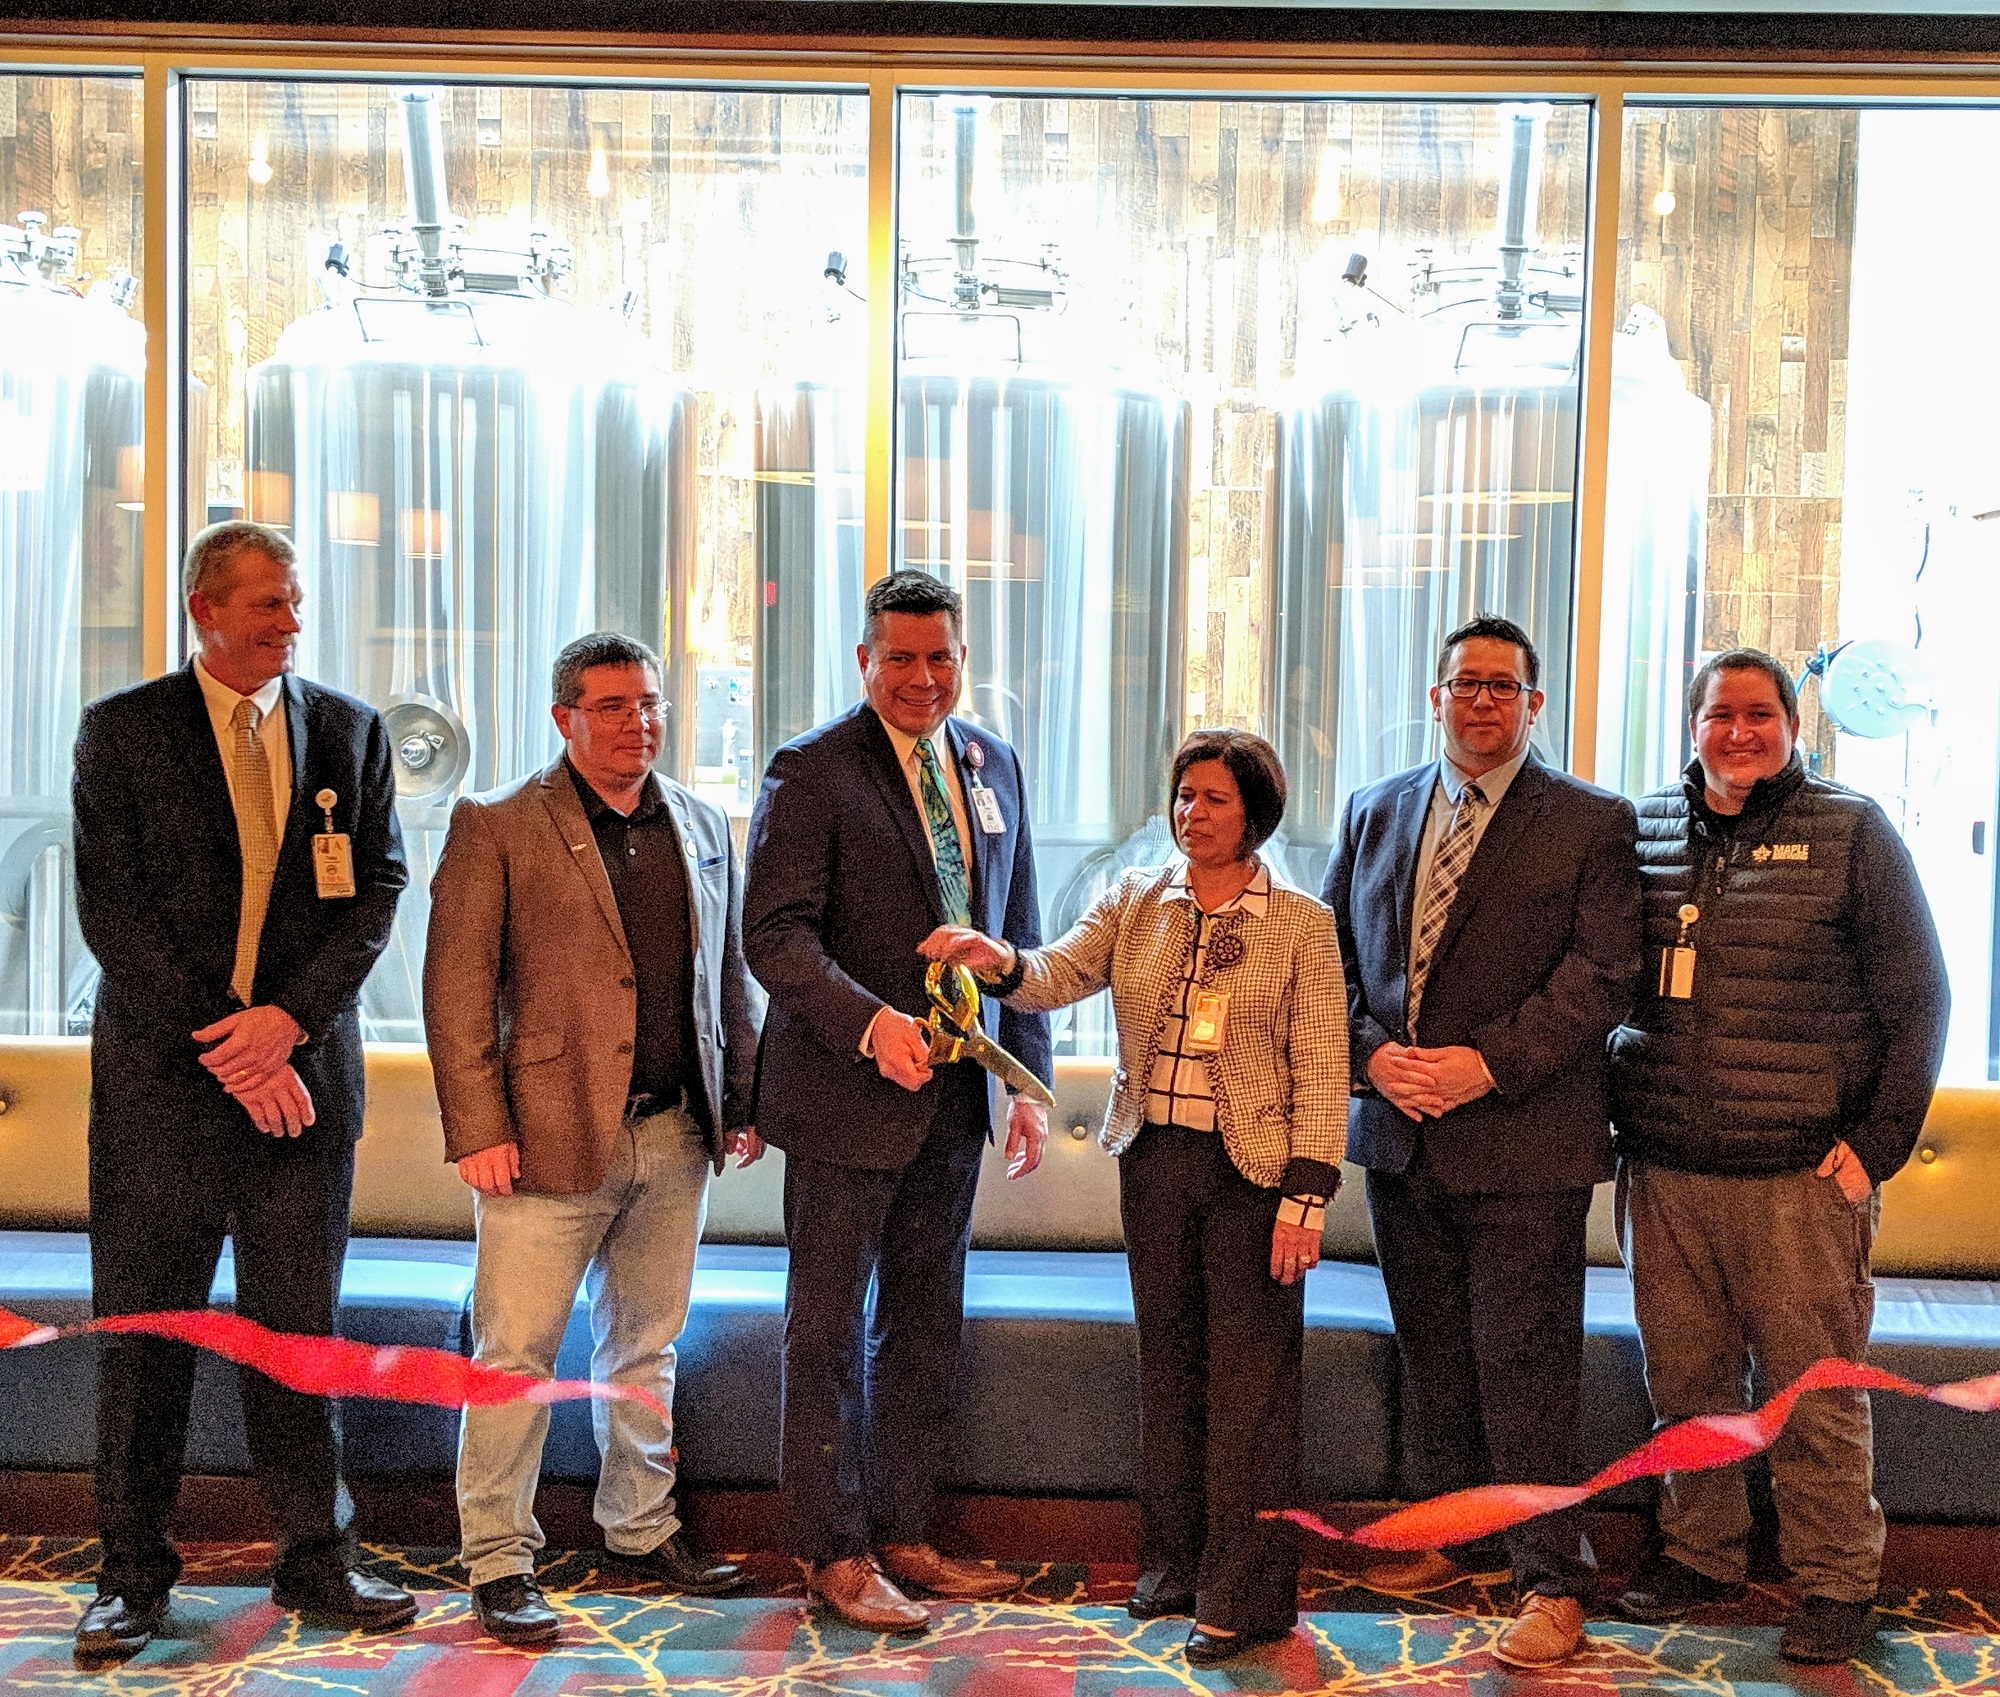 Akwesasne Mohawk Casino Resort hosts grand opening and ribbon cutting ceremony for Maple Brewing